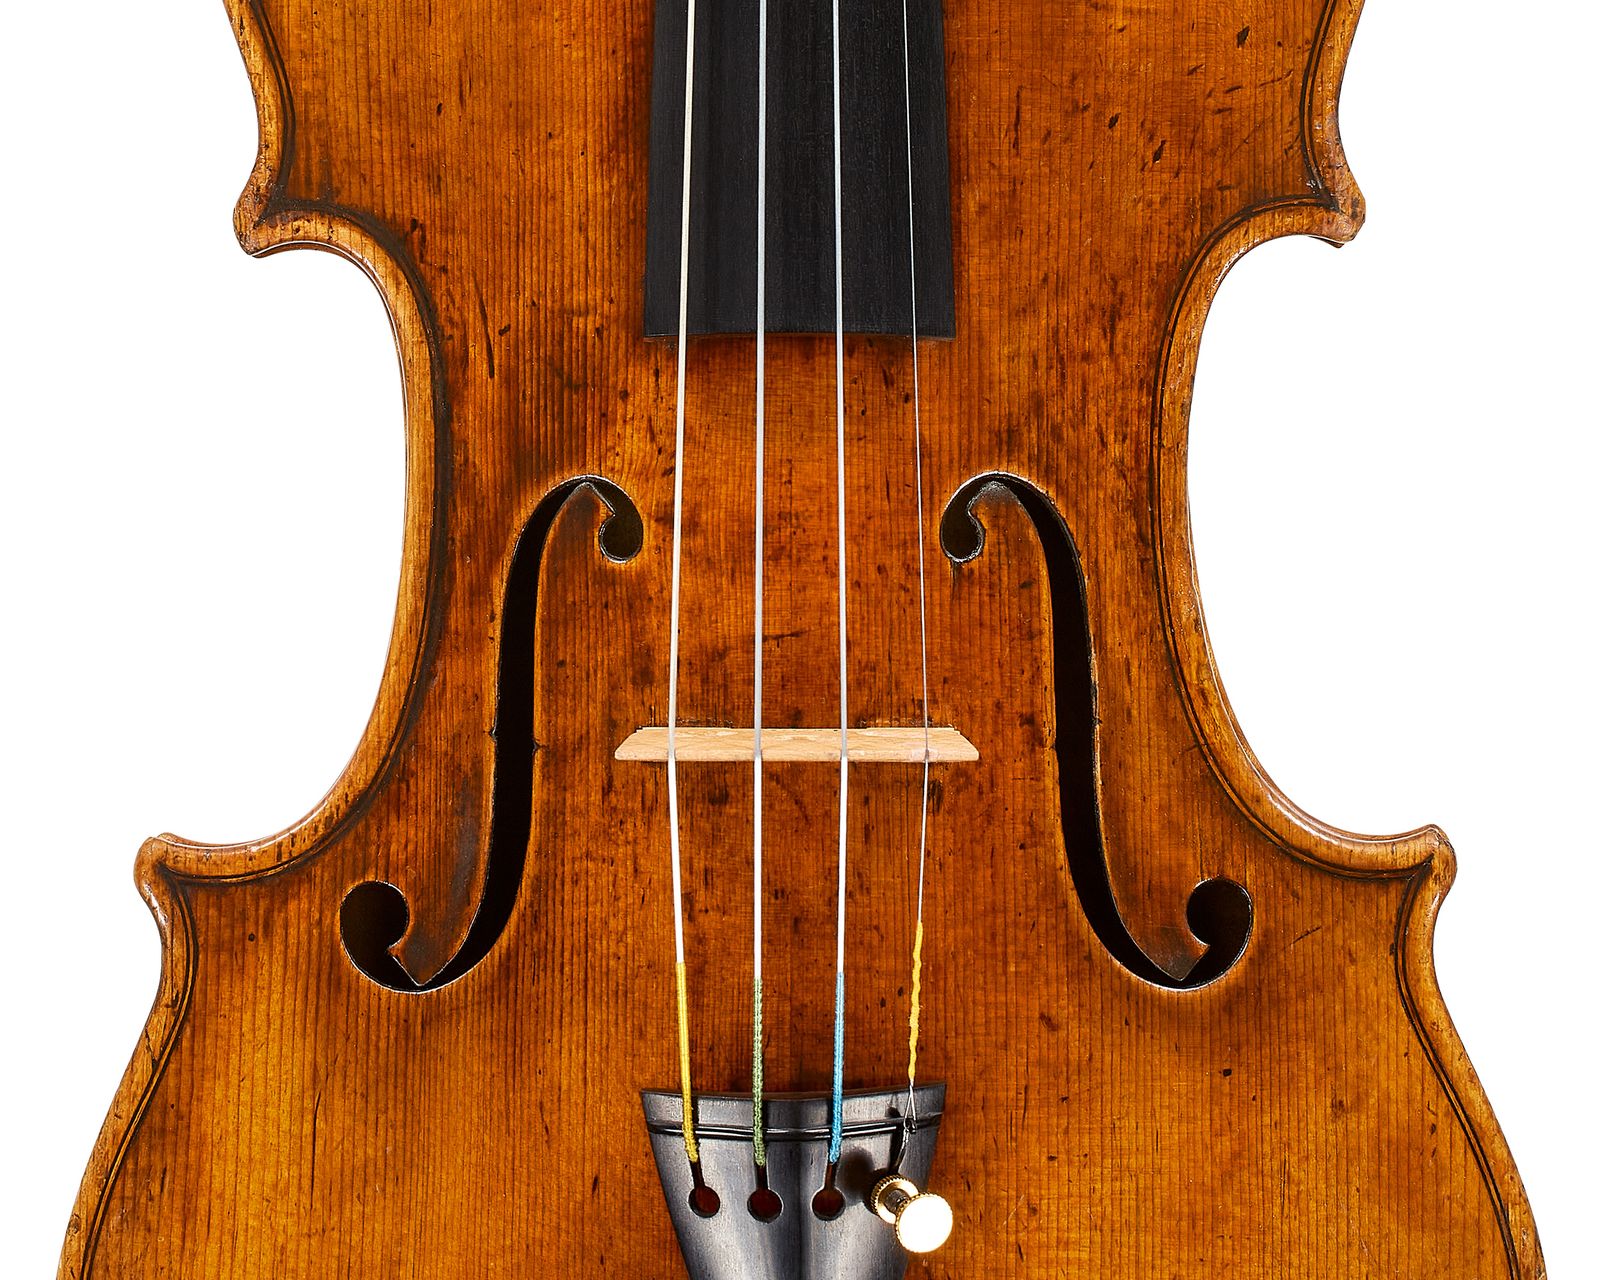 This 308-Year-Old Violin Could Become the Most Expensive Ever Sold Smart News| Magazine